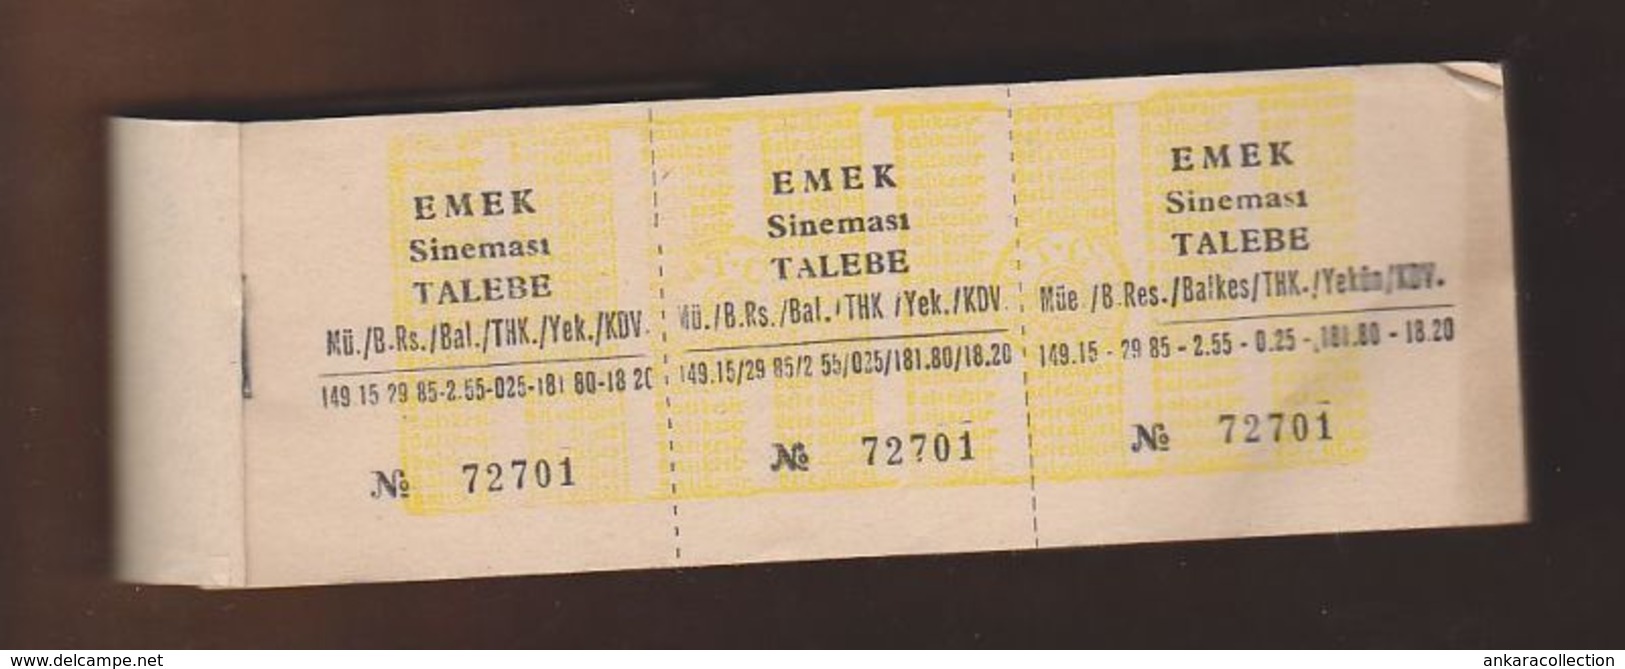 AC - EMEK CINEMA 100 PIECES UNUSED TICKETS WITH COUNTERFOILS 72701 - 72800 FOR STUDENT BALIKESIR, TURKEY - Tickets De Concerts